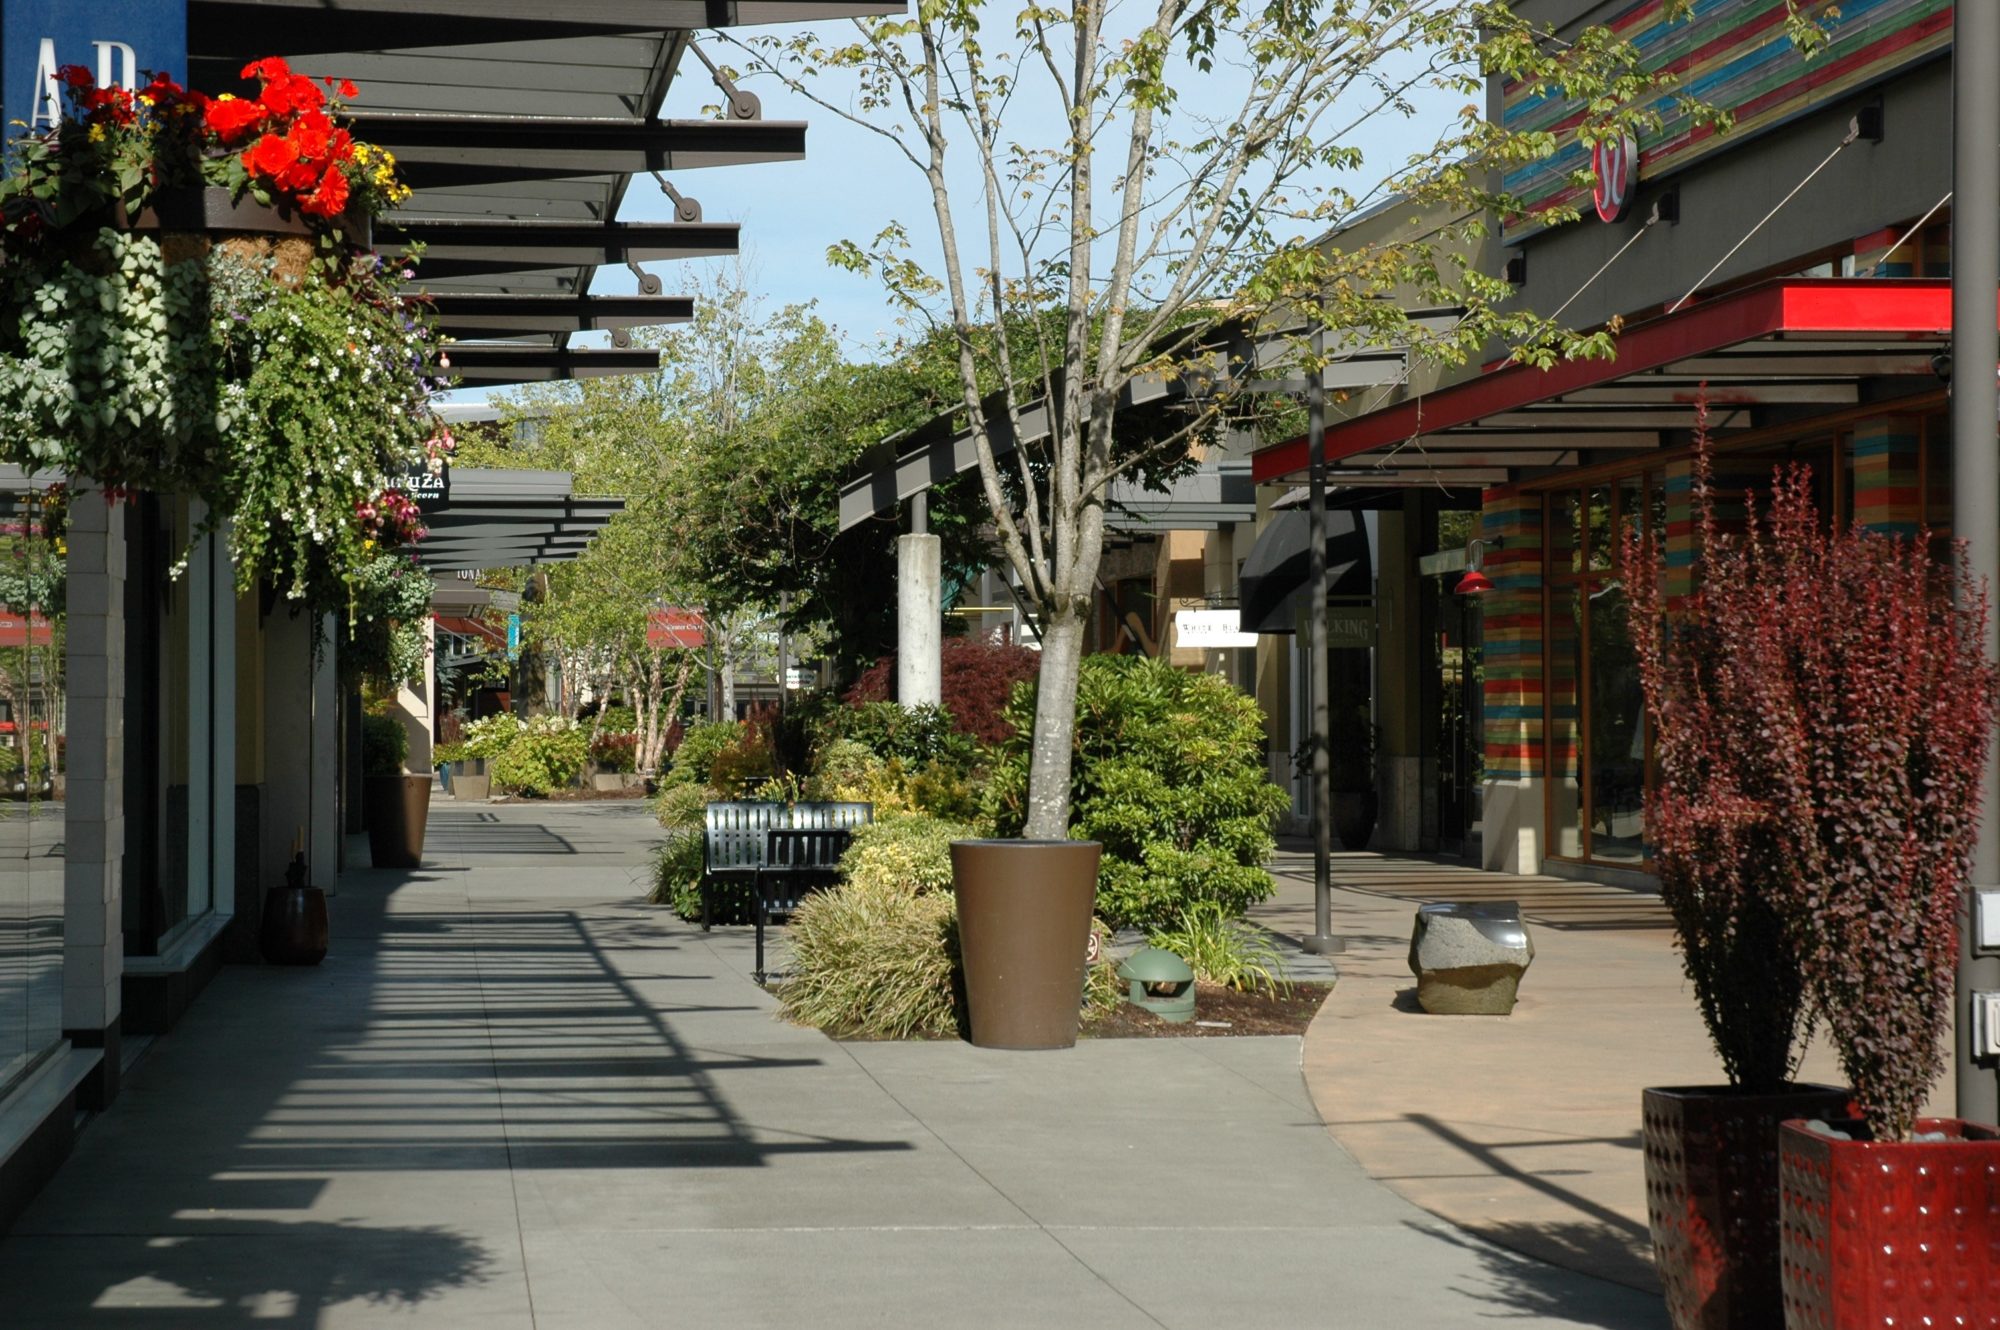 The Village at Alderwood Mall | PACE Engineers, Inc.